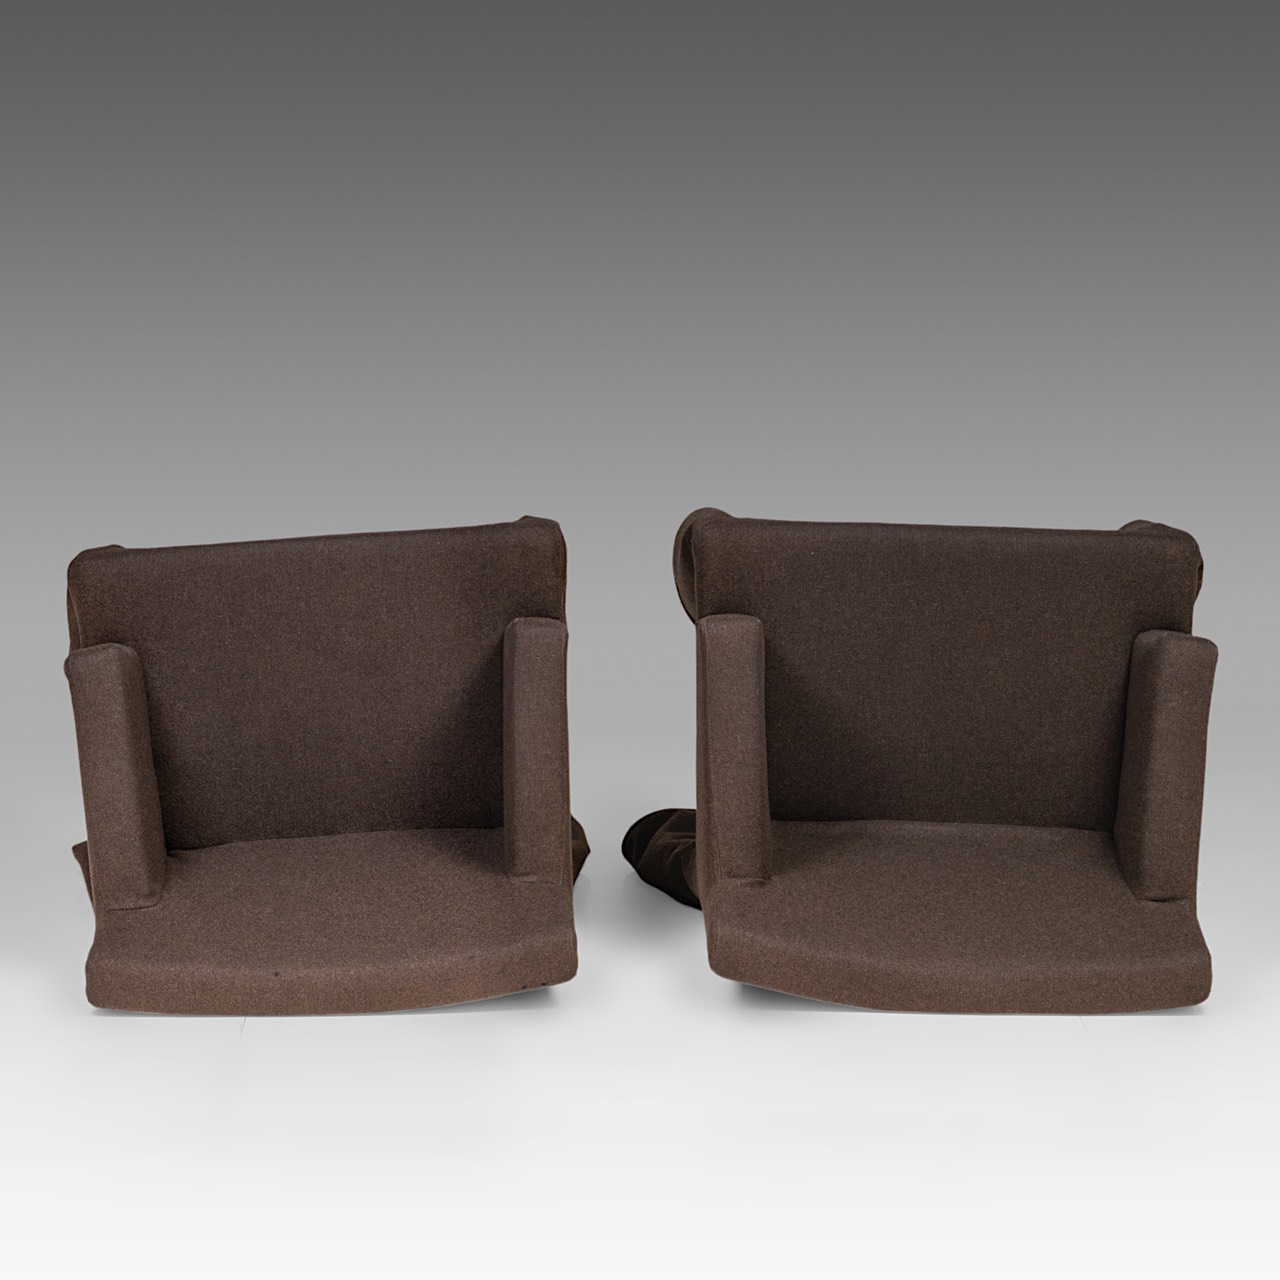 A pair of 'VIP' chairs by Marcel Wanders, the Netherlands, 2000, H 82 - W 60 cm - Image 7 of 9